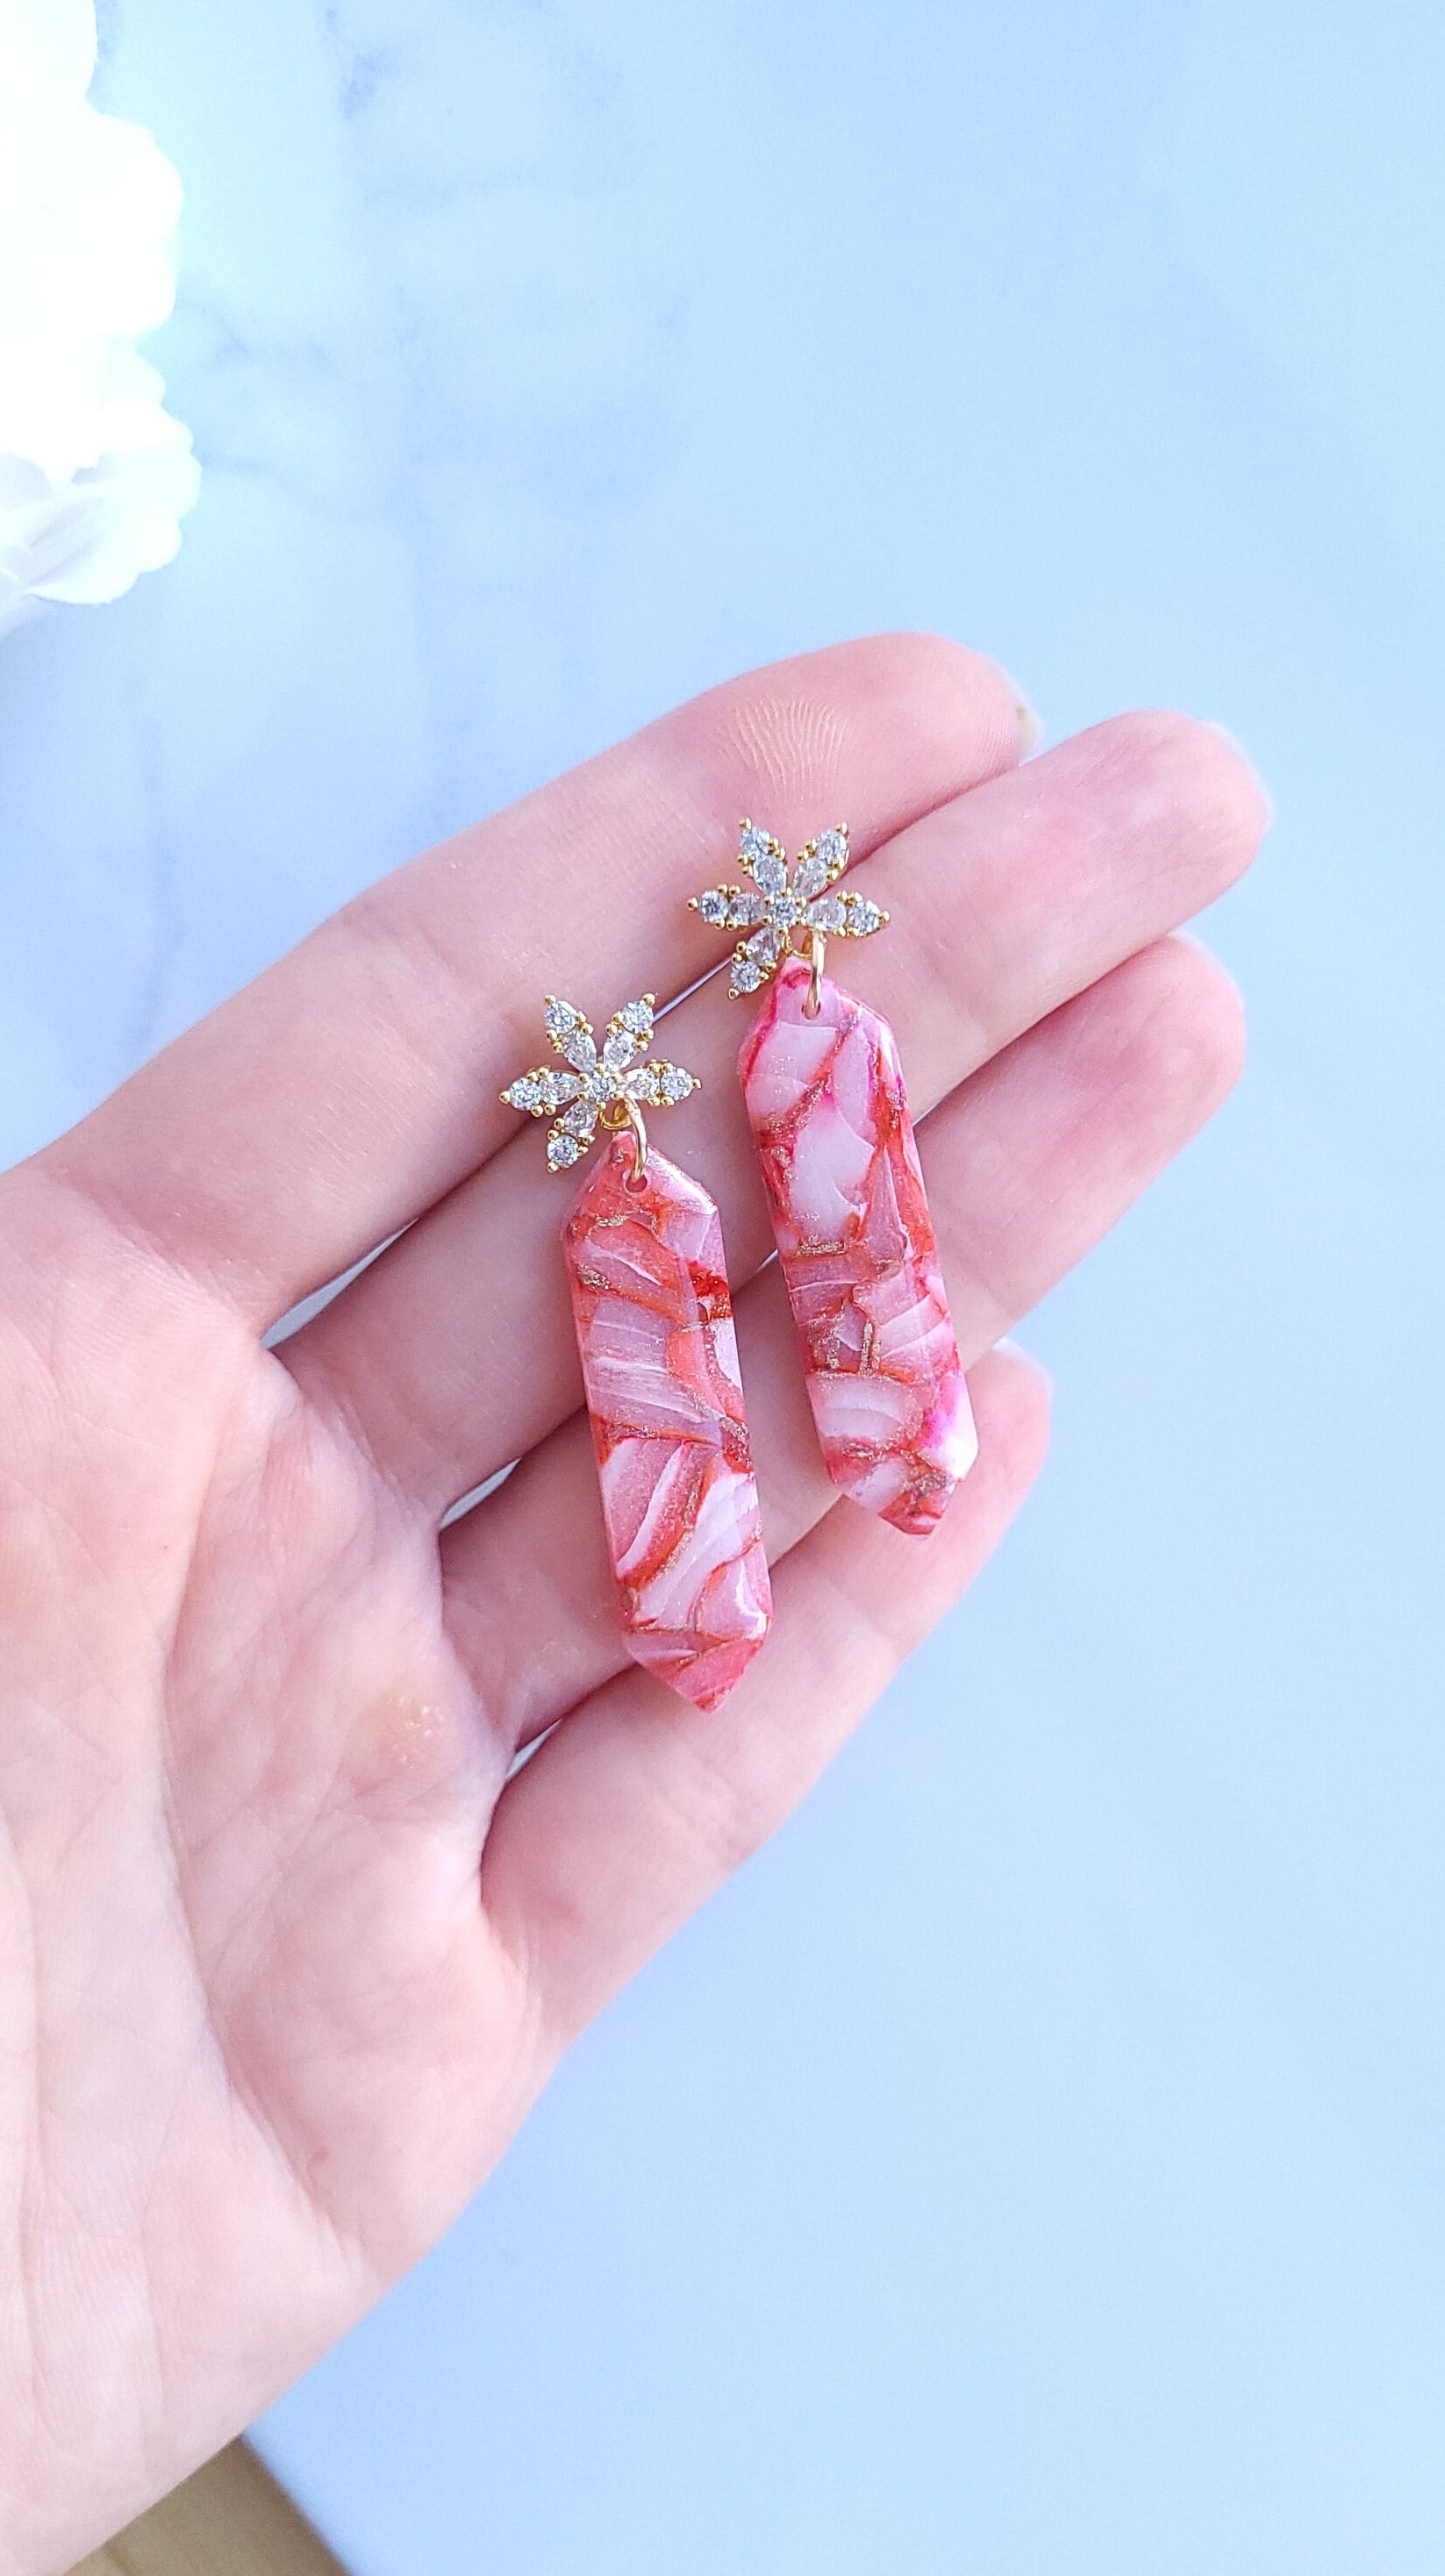 Red/Pink & Golden Green Marble Earrings | Handmade Polymer Clay Statement Dangle